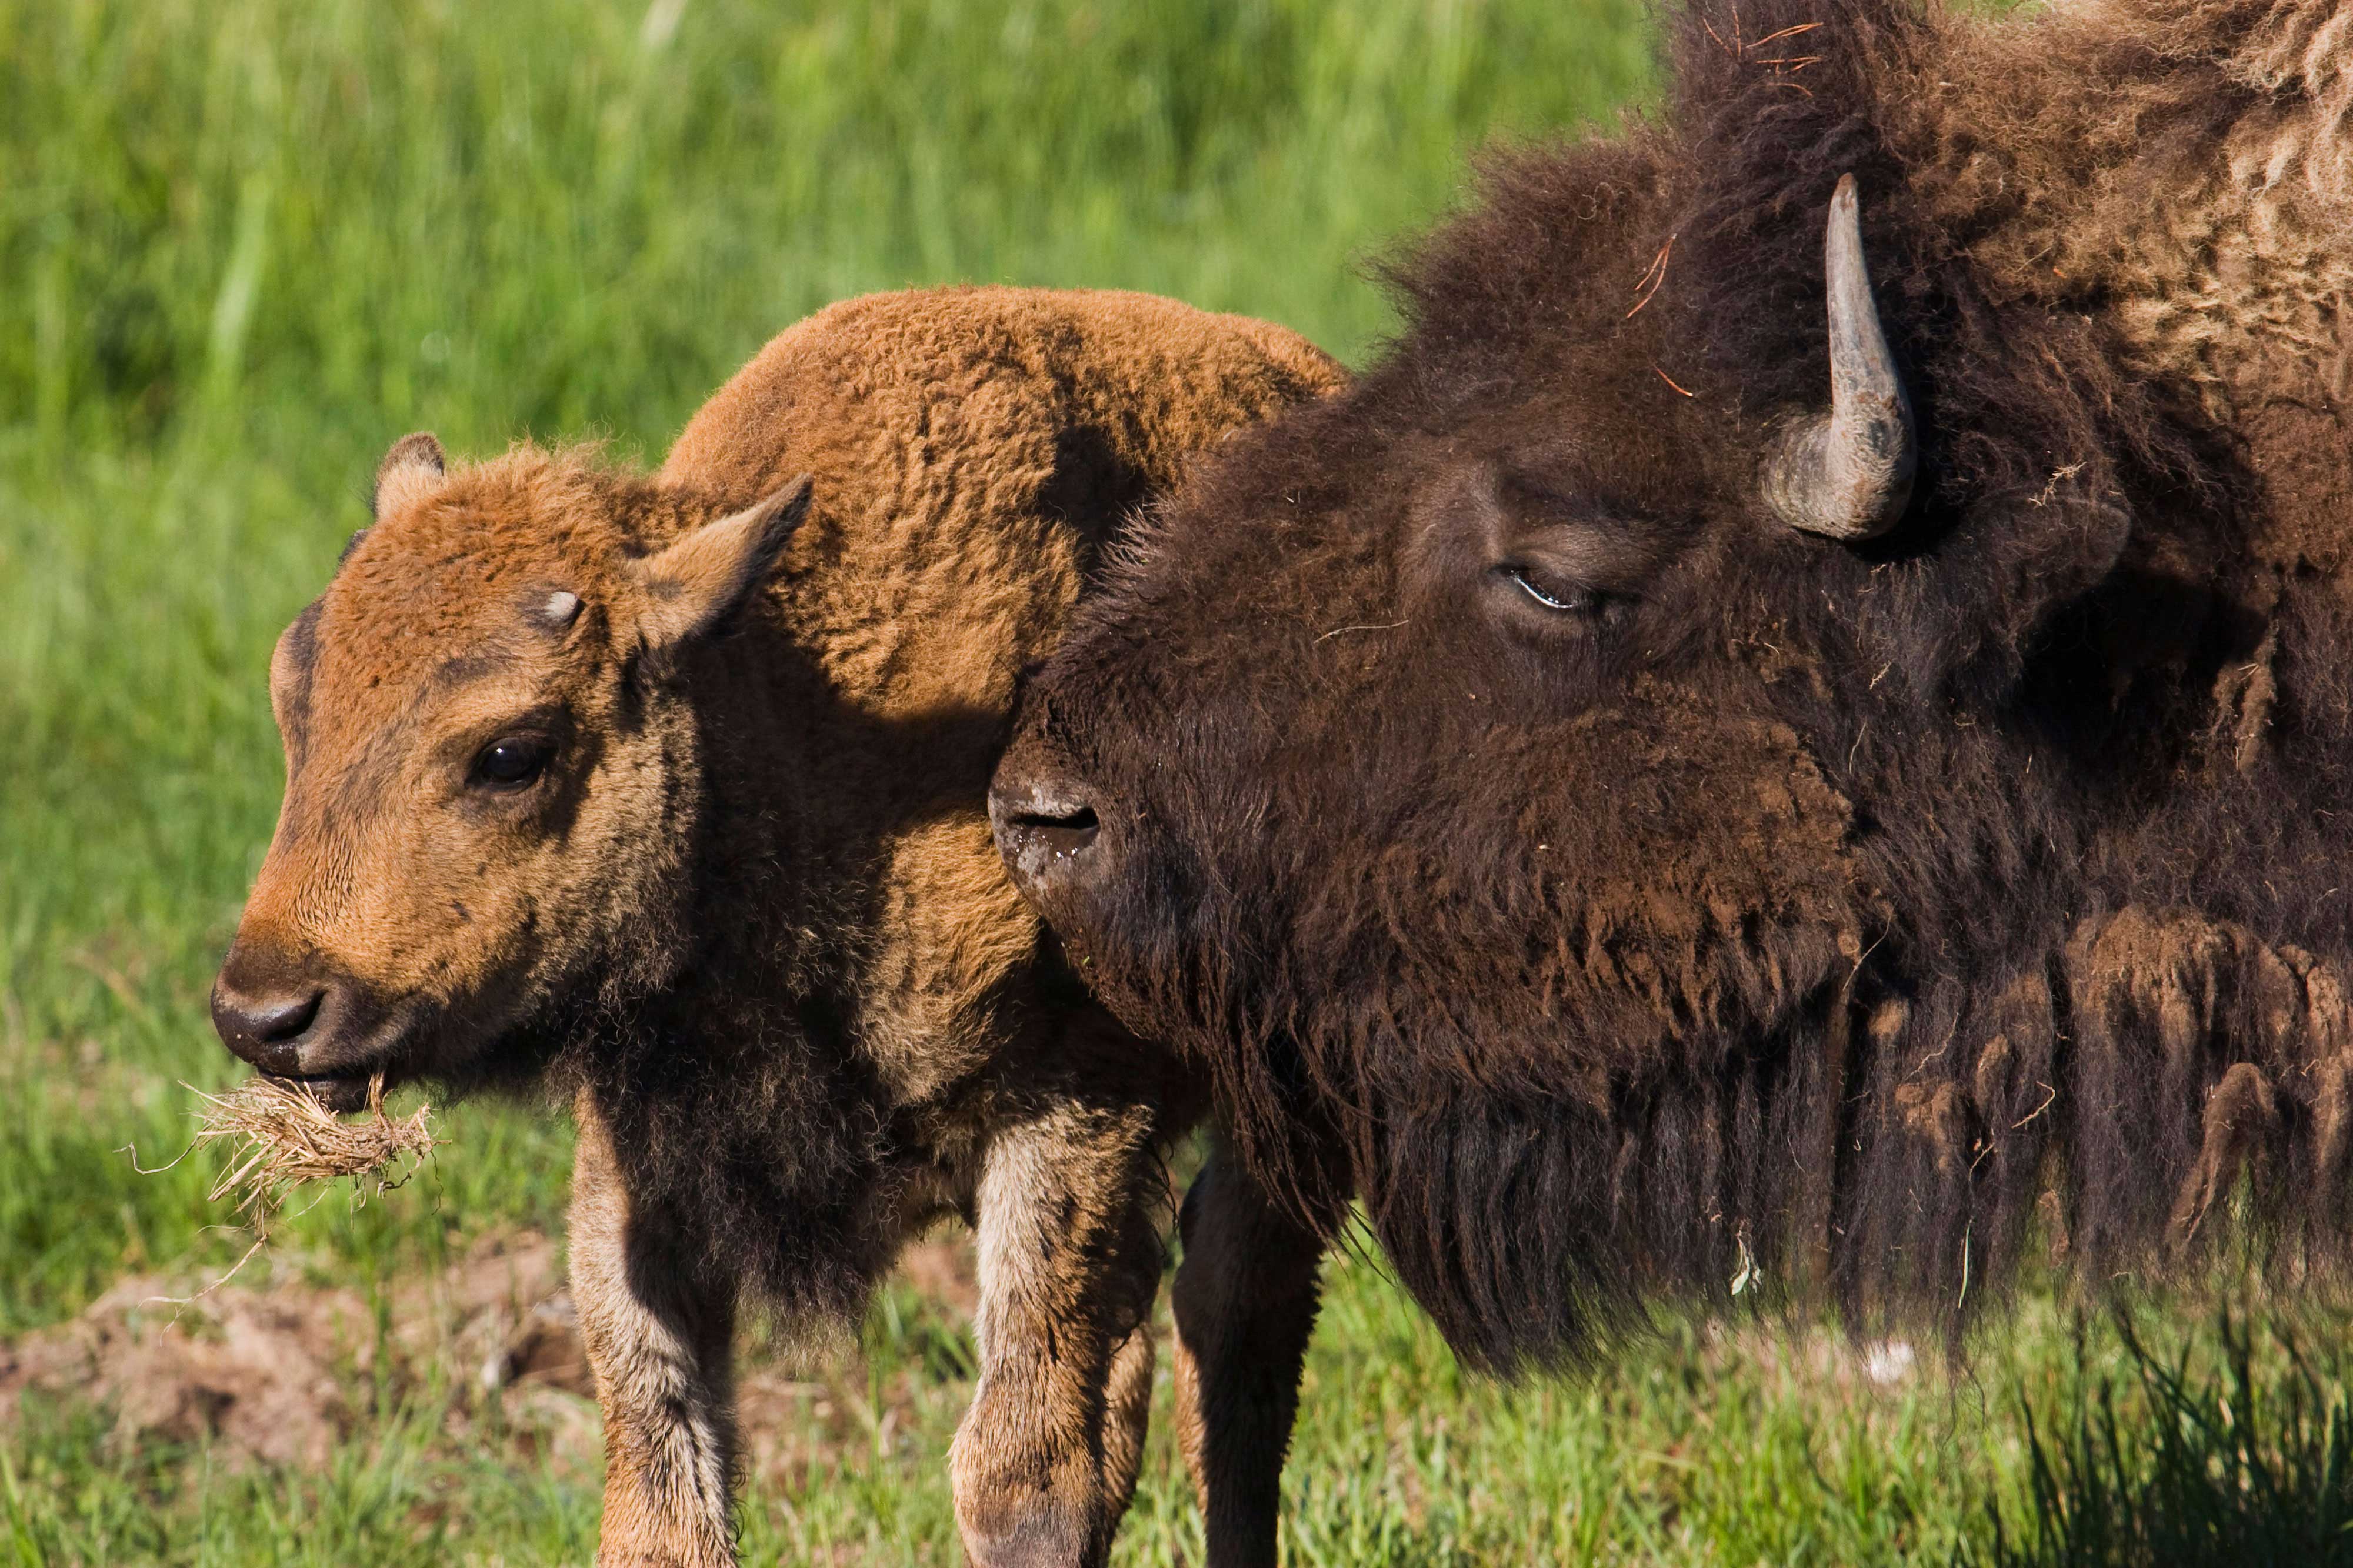 A bison and its calf.